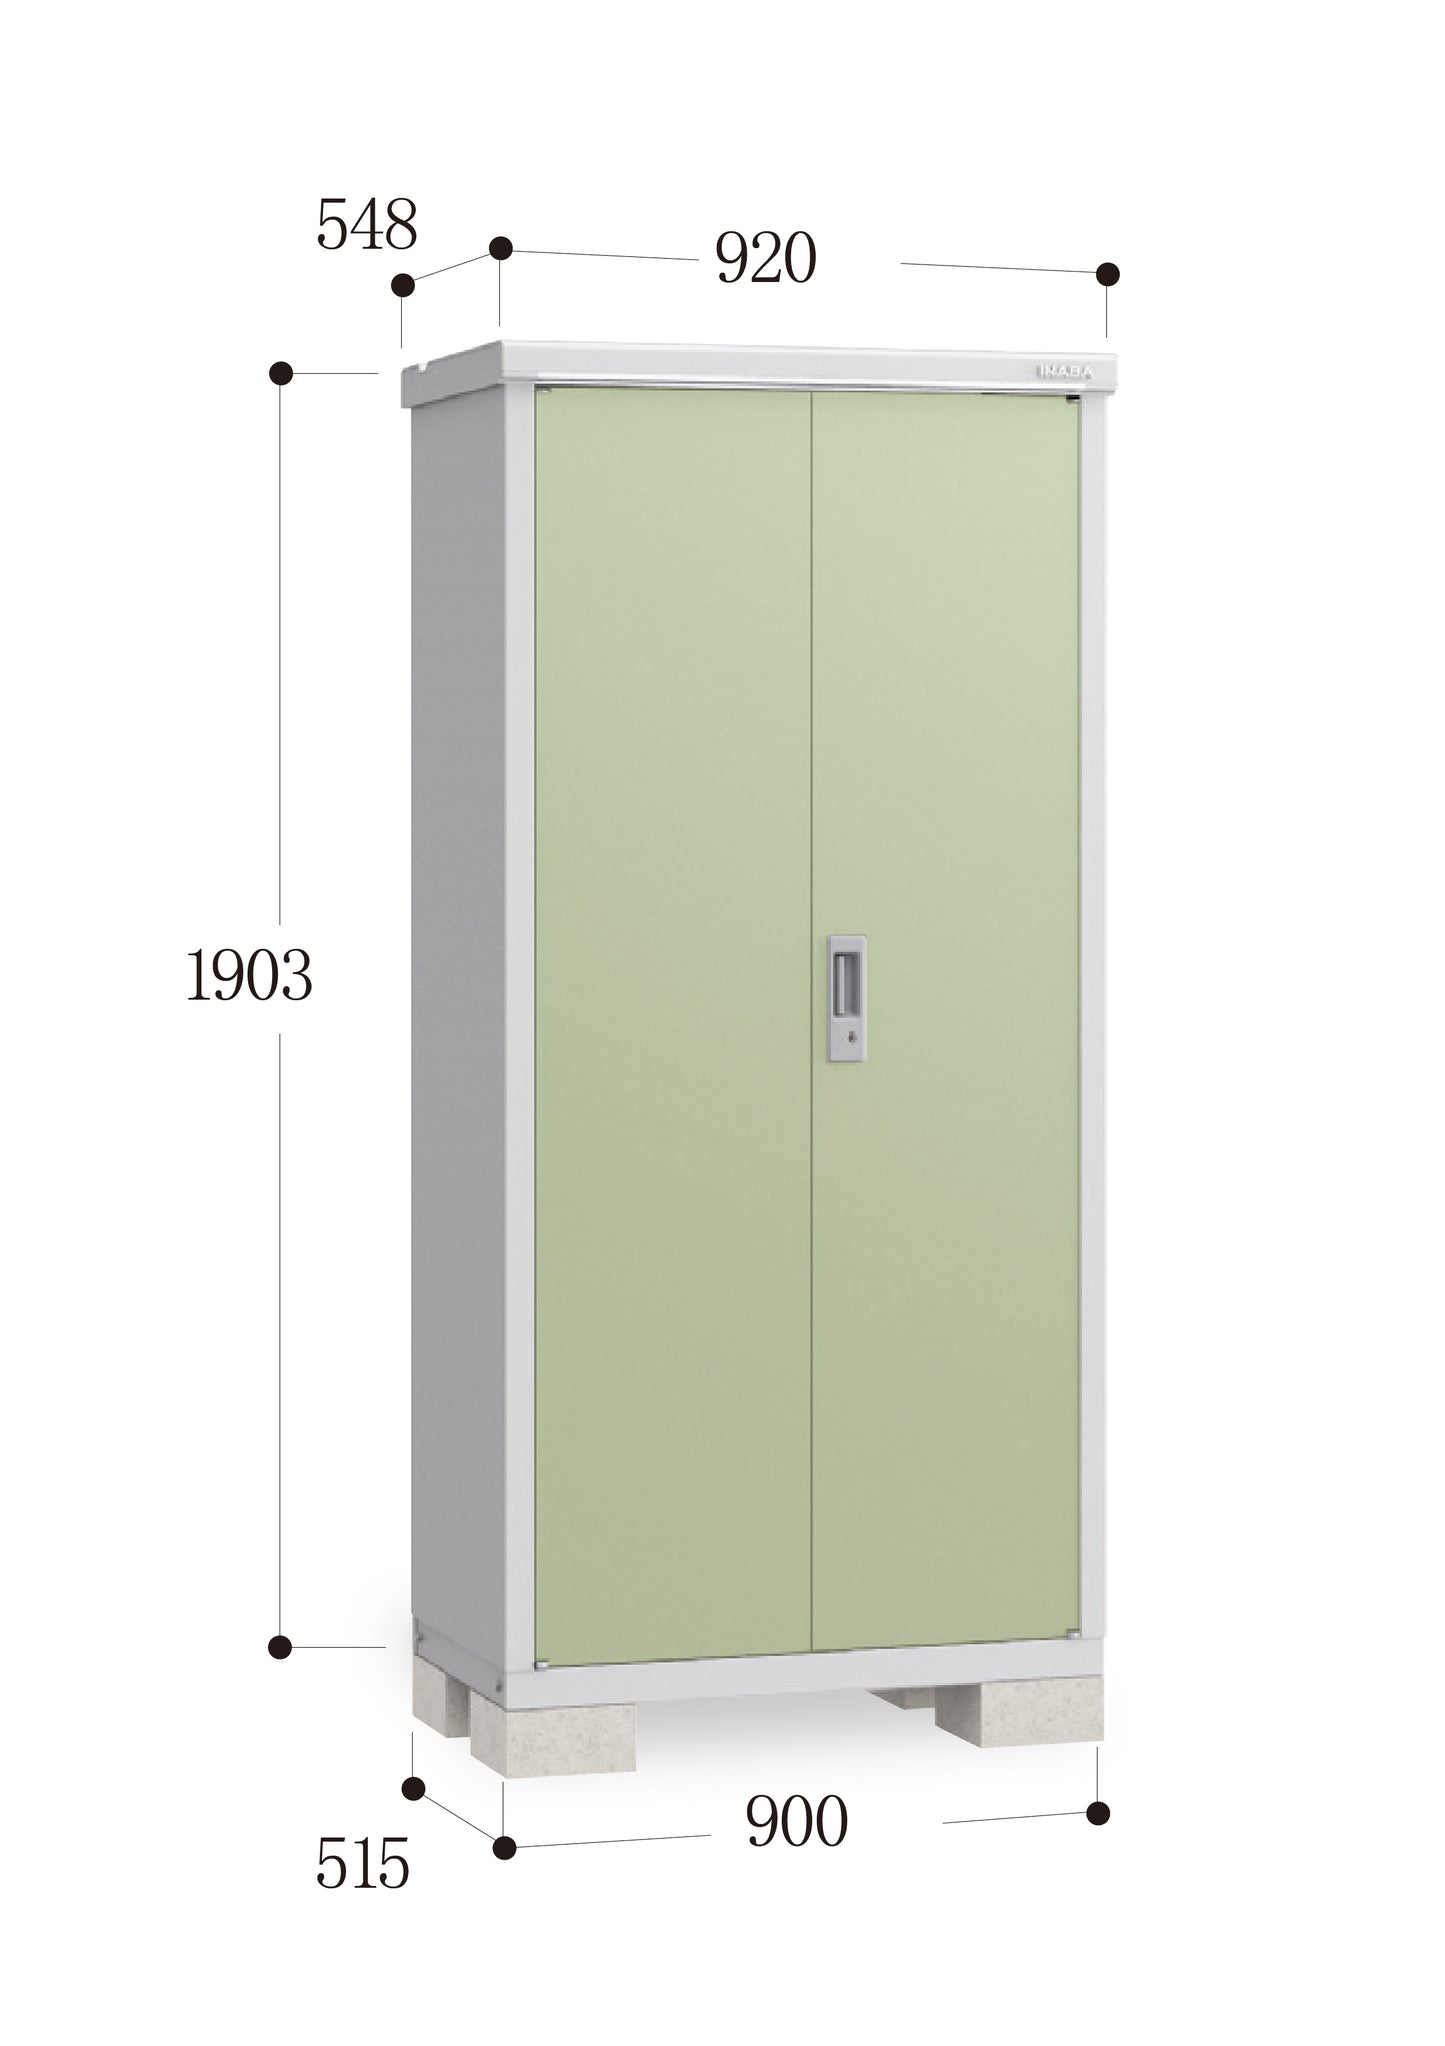 *Pre-order* Inaba Outdoor Storage BJX-095E (W920XD548XH1903mm)0.959m3